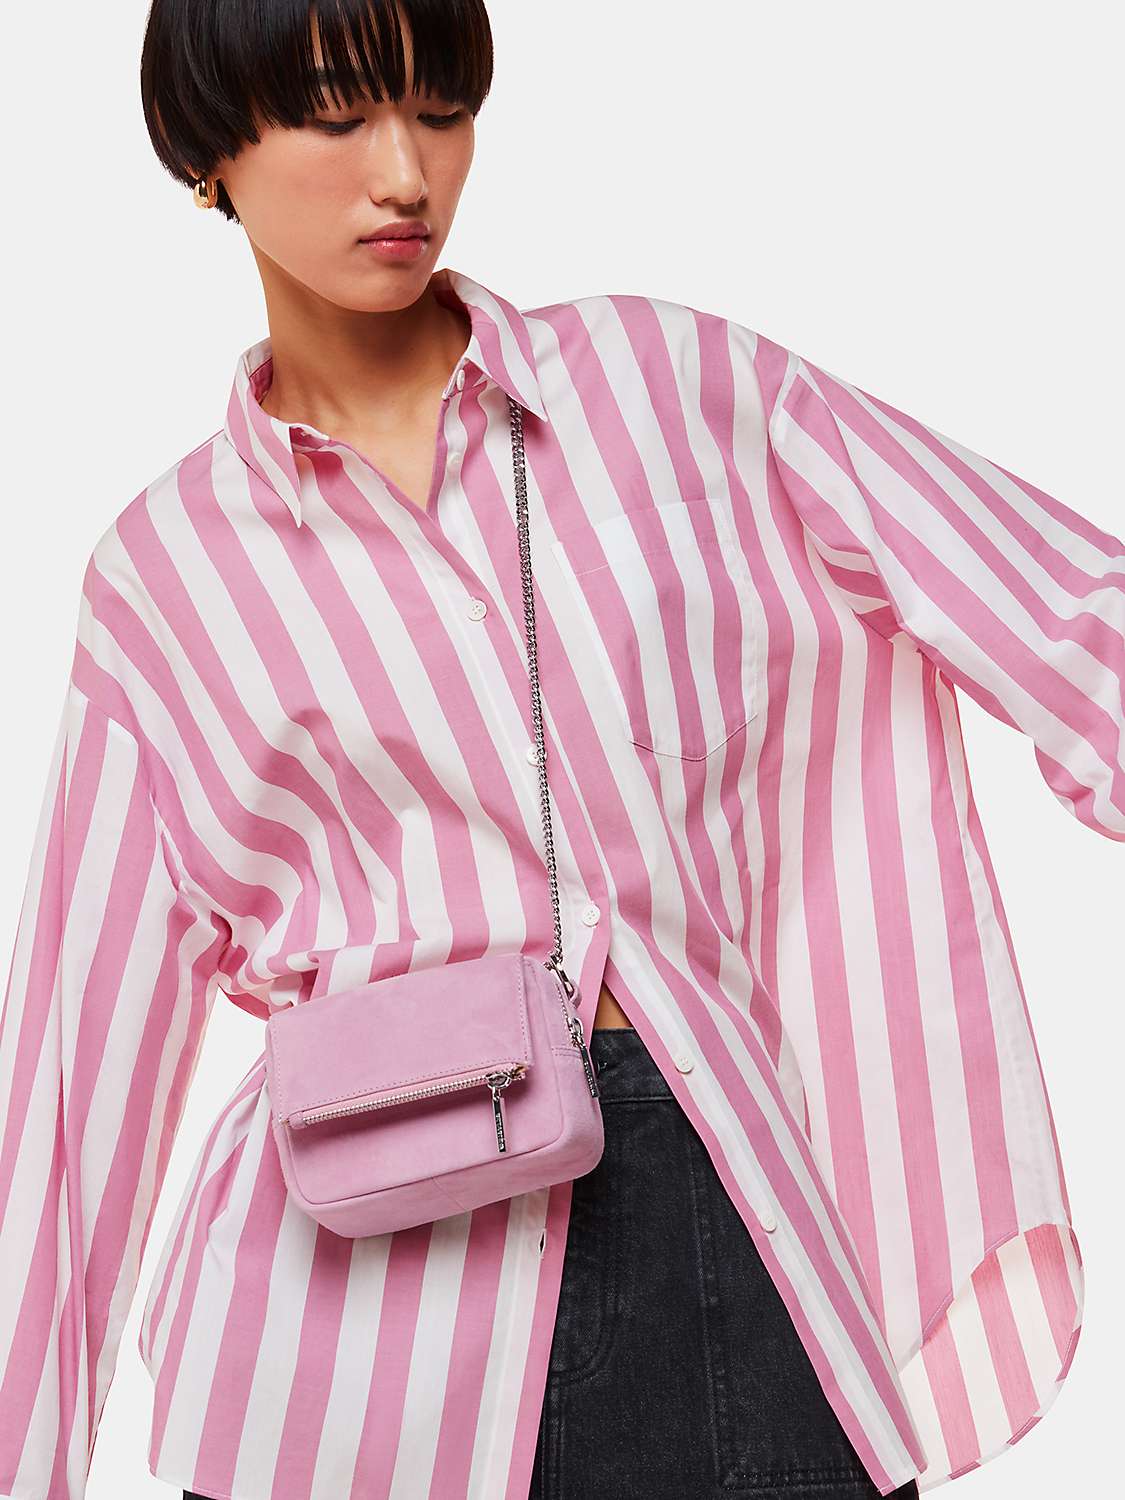 Buy Whistles Oversized Striped Cotton Shirt, Pink/White Online at johnlewis.com